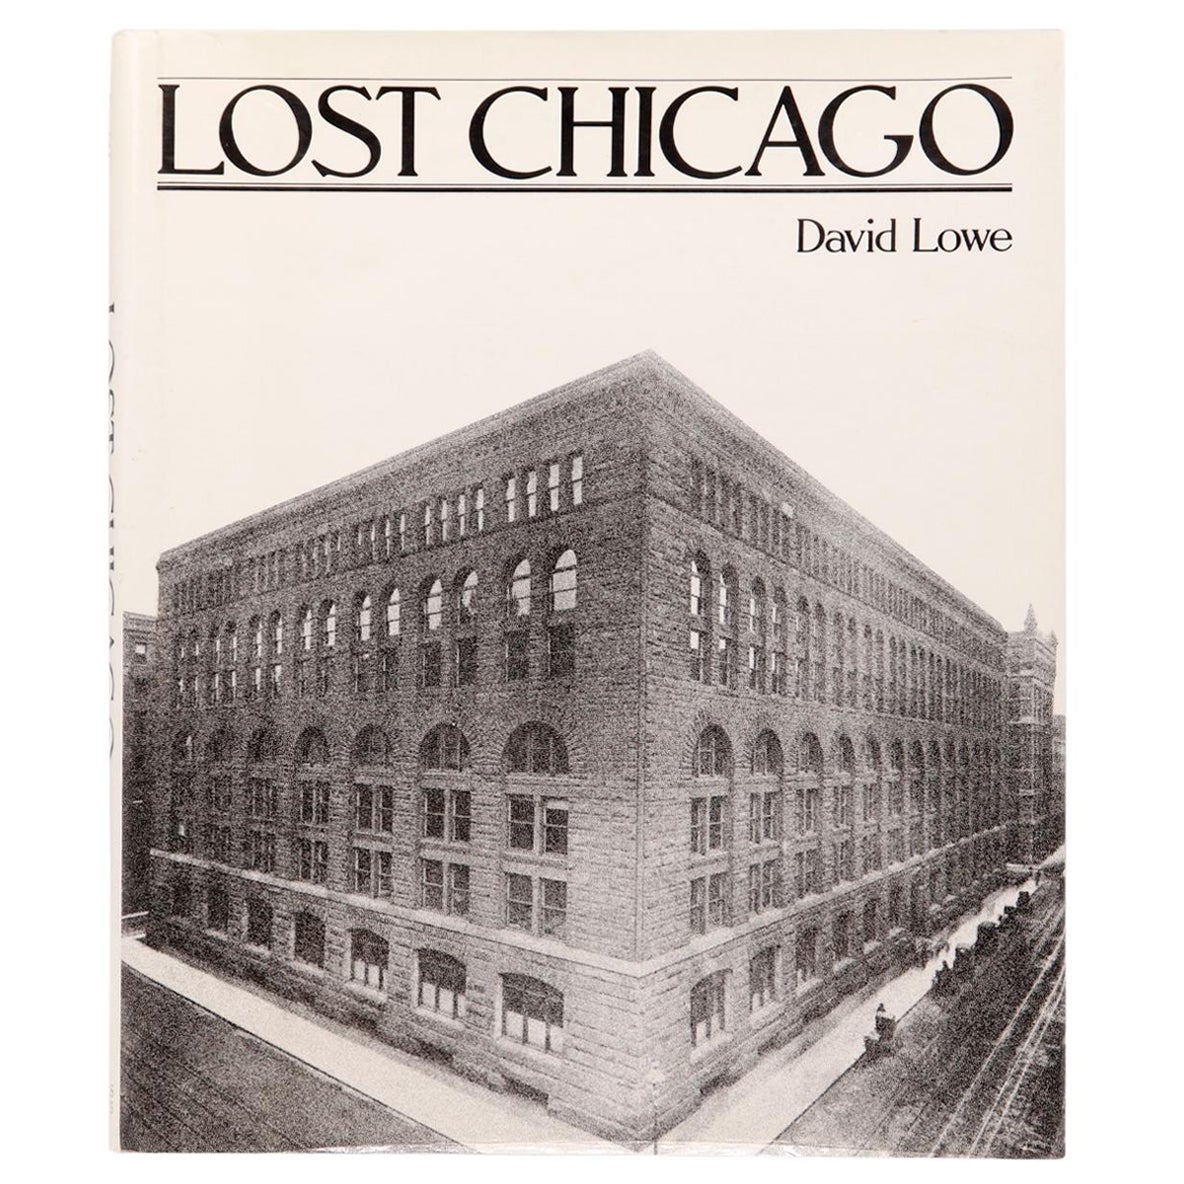 Lost Chicago by David Lowe